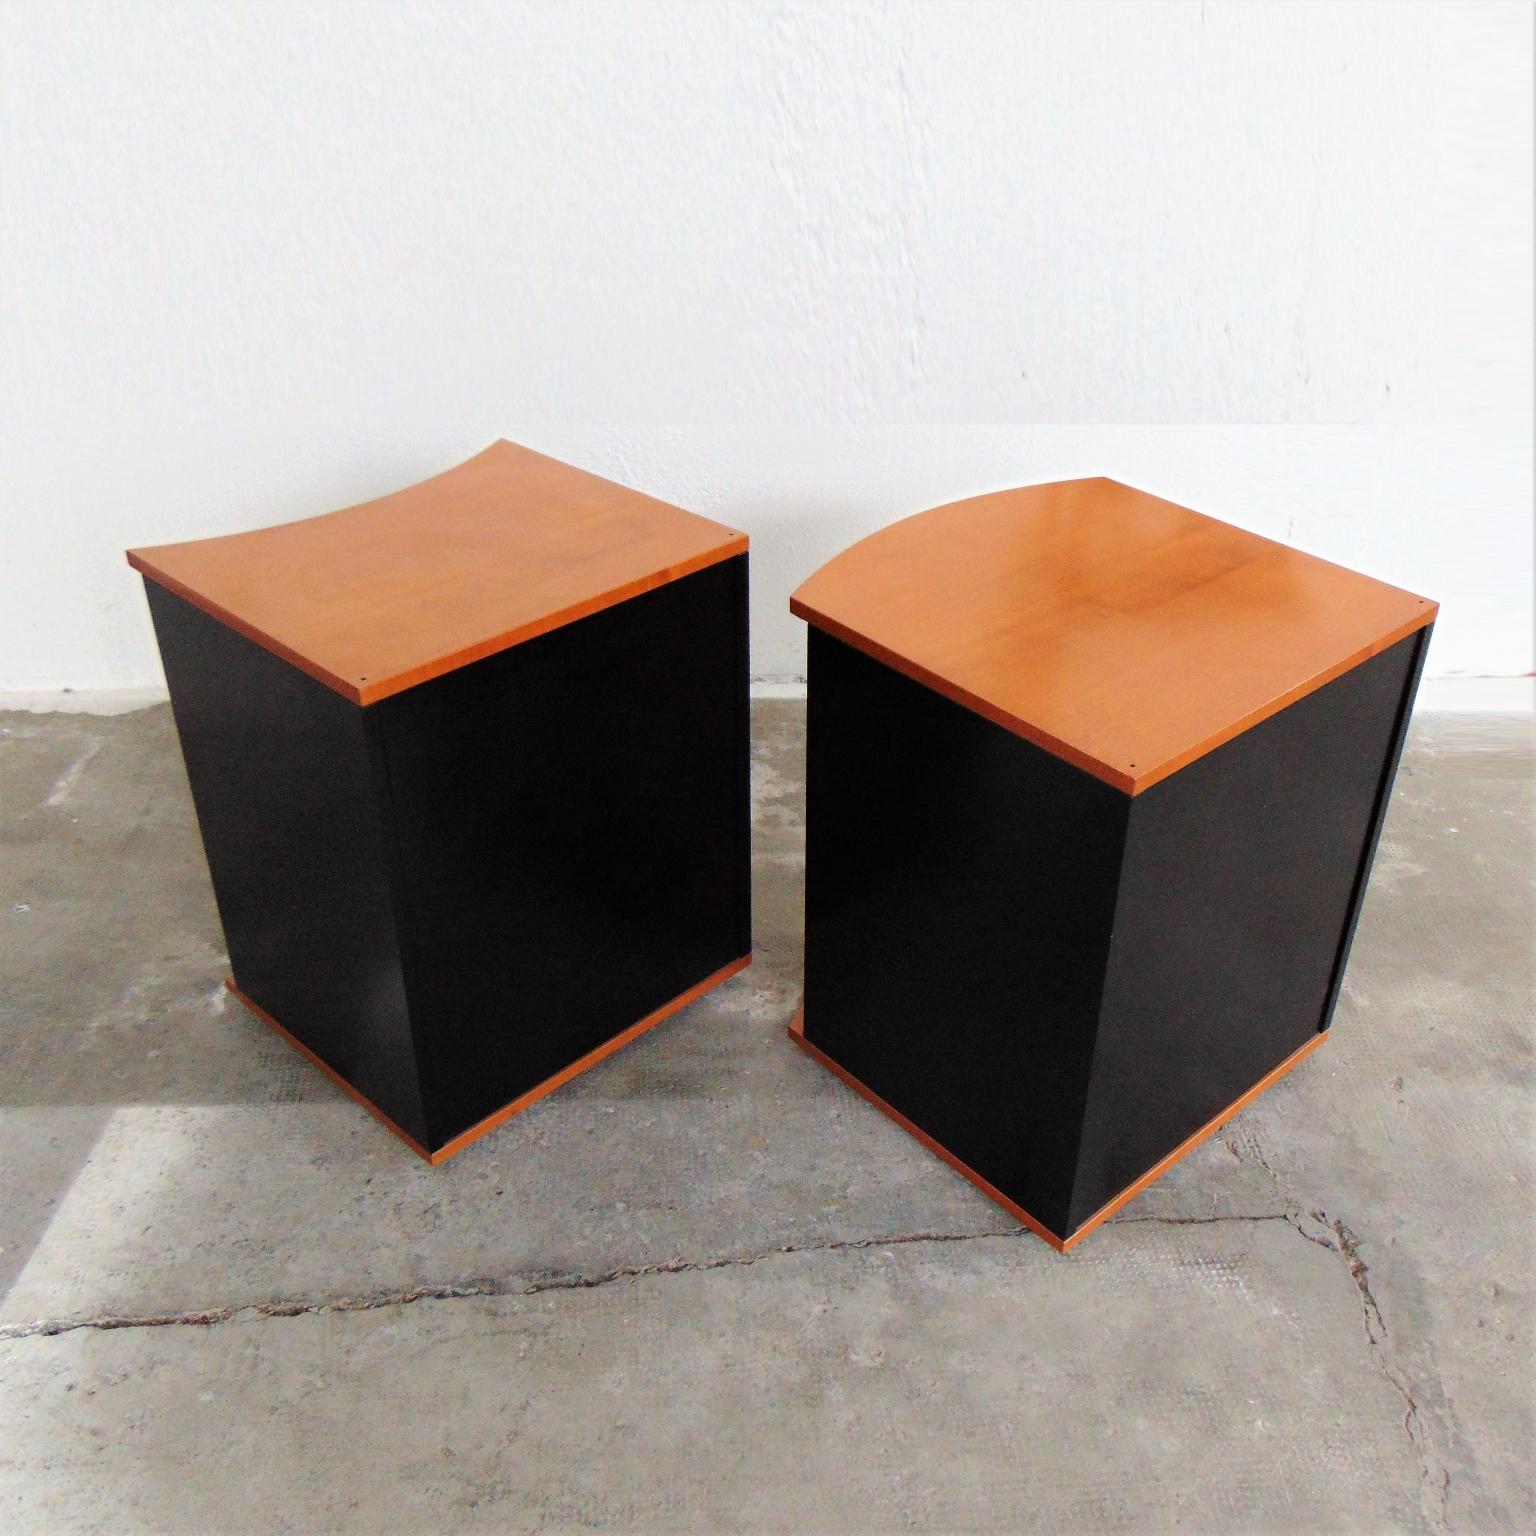 1990s Set of 2 Nightstands Walnut Stained Cherry and Black Lacquer, Roche Bobois For Sale 6